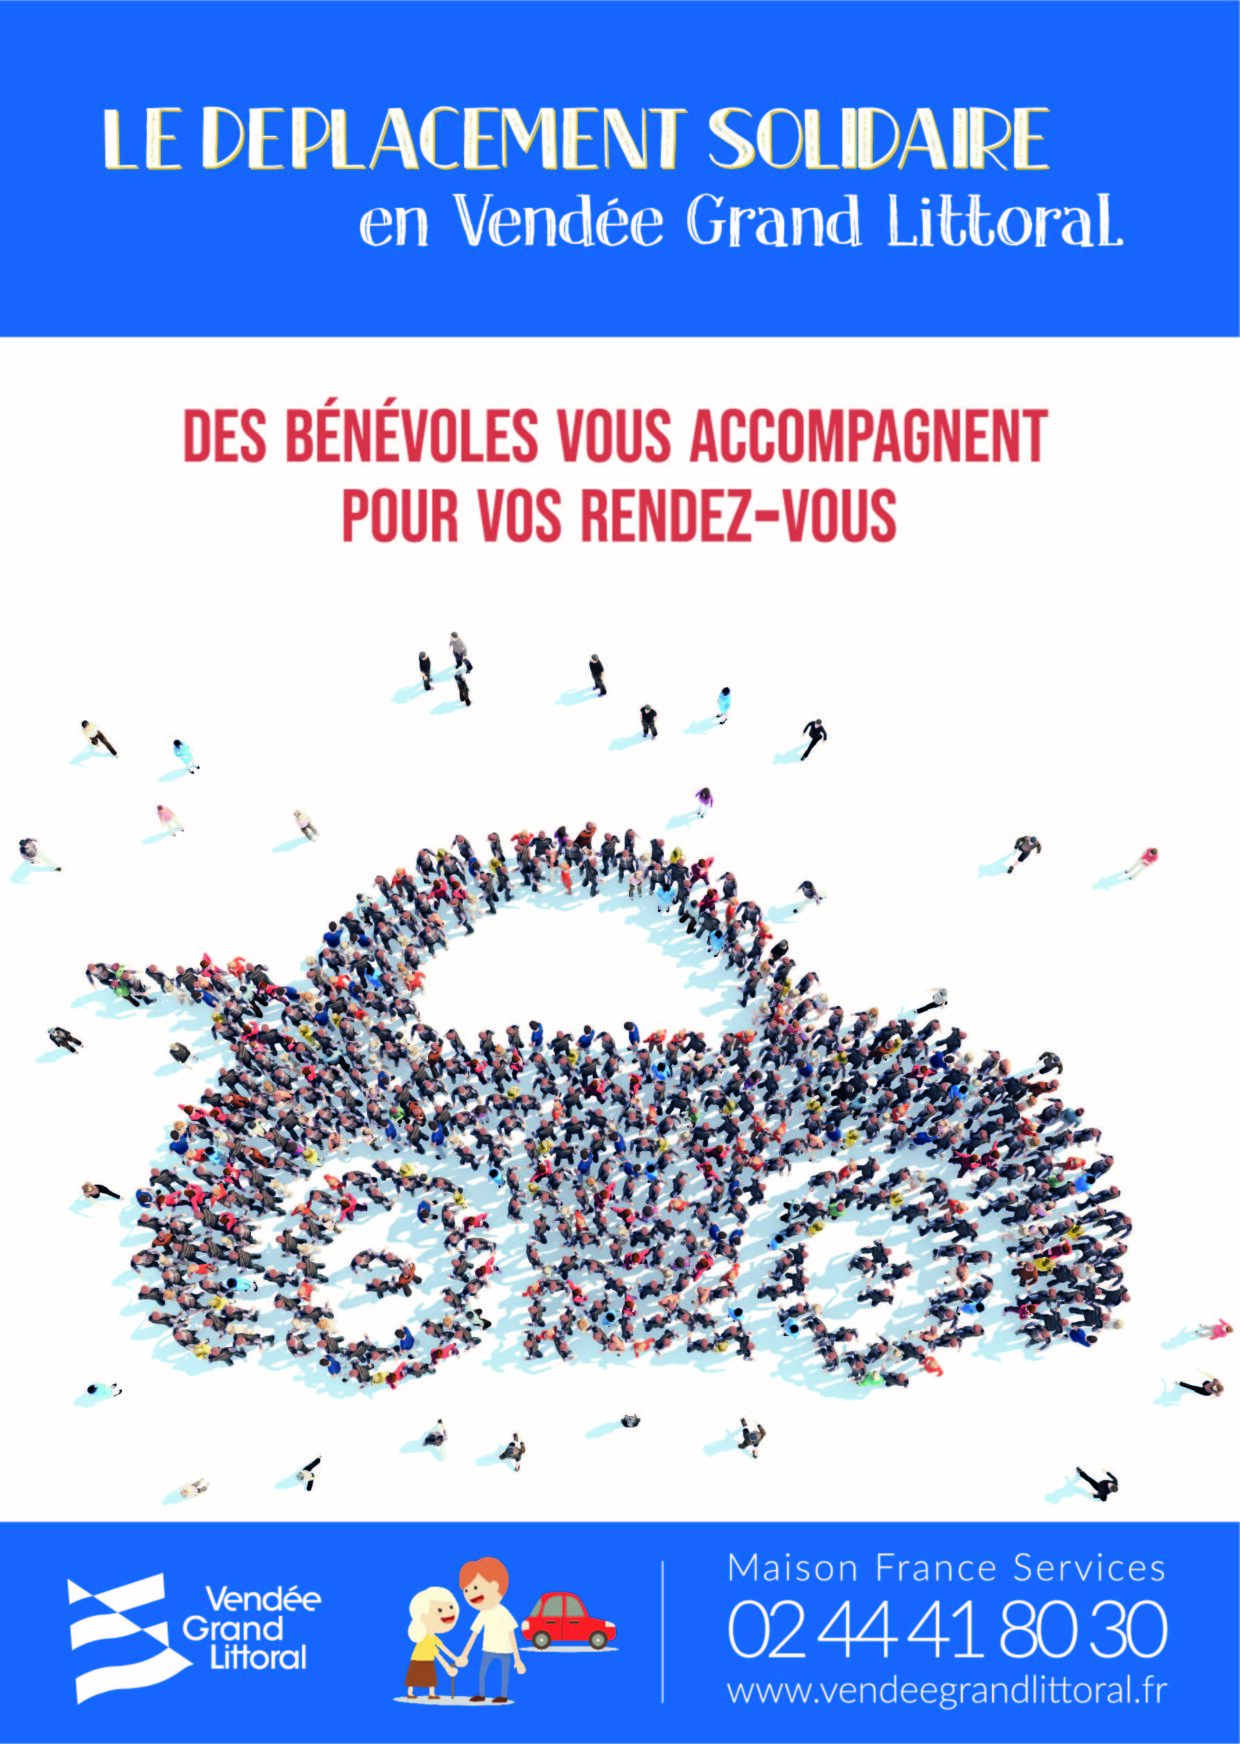 AfficheDeplacementSolidaire_A3_BD